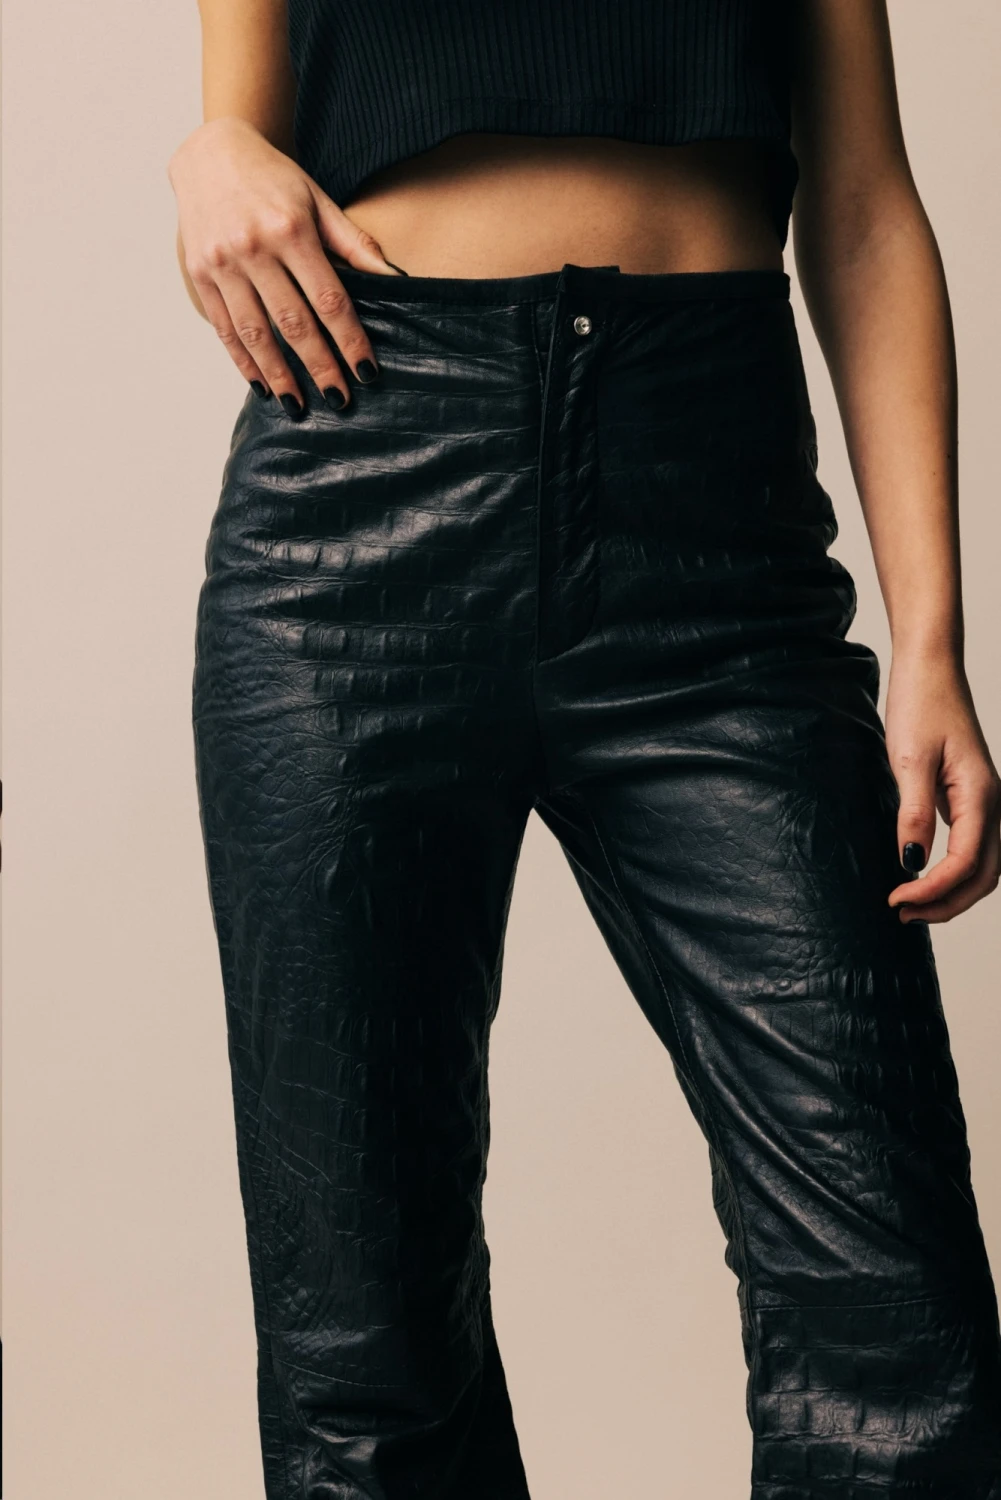 Formal Leather Pants Crocco negro 40